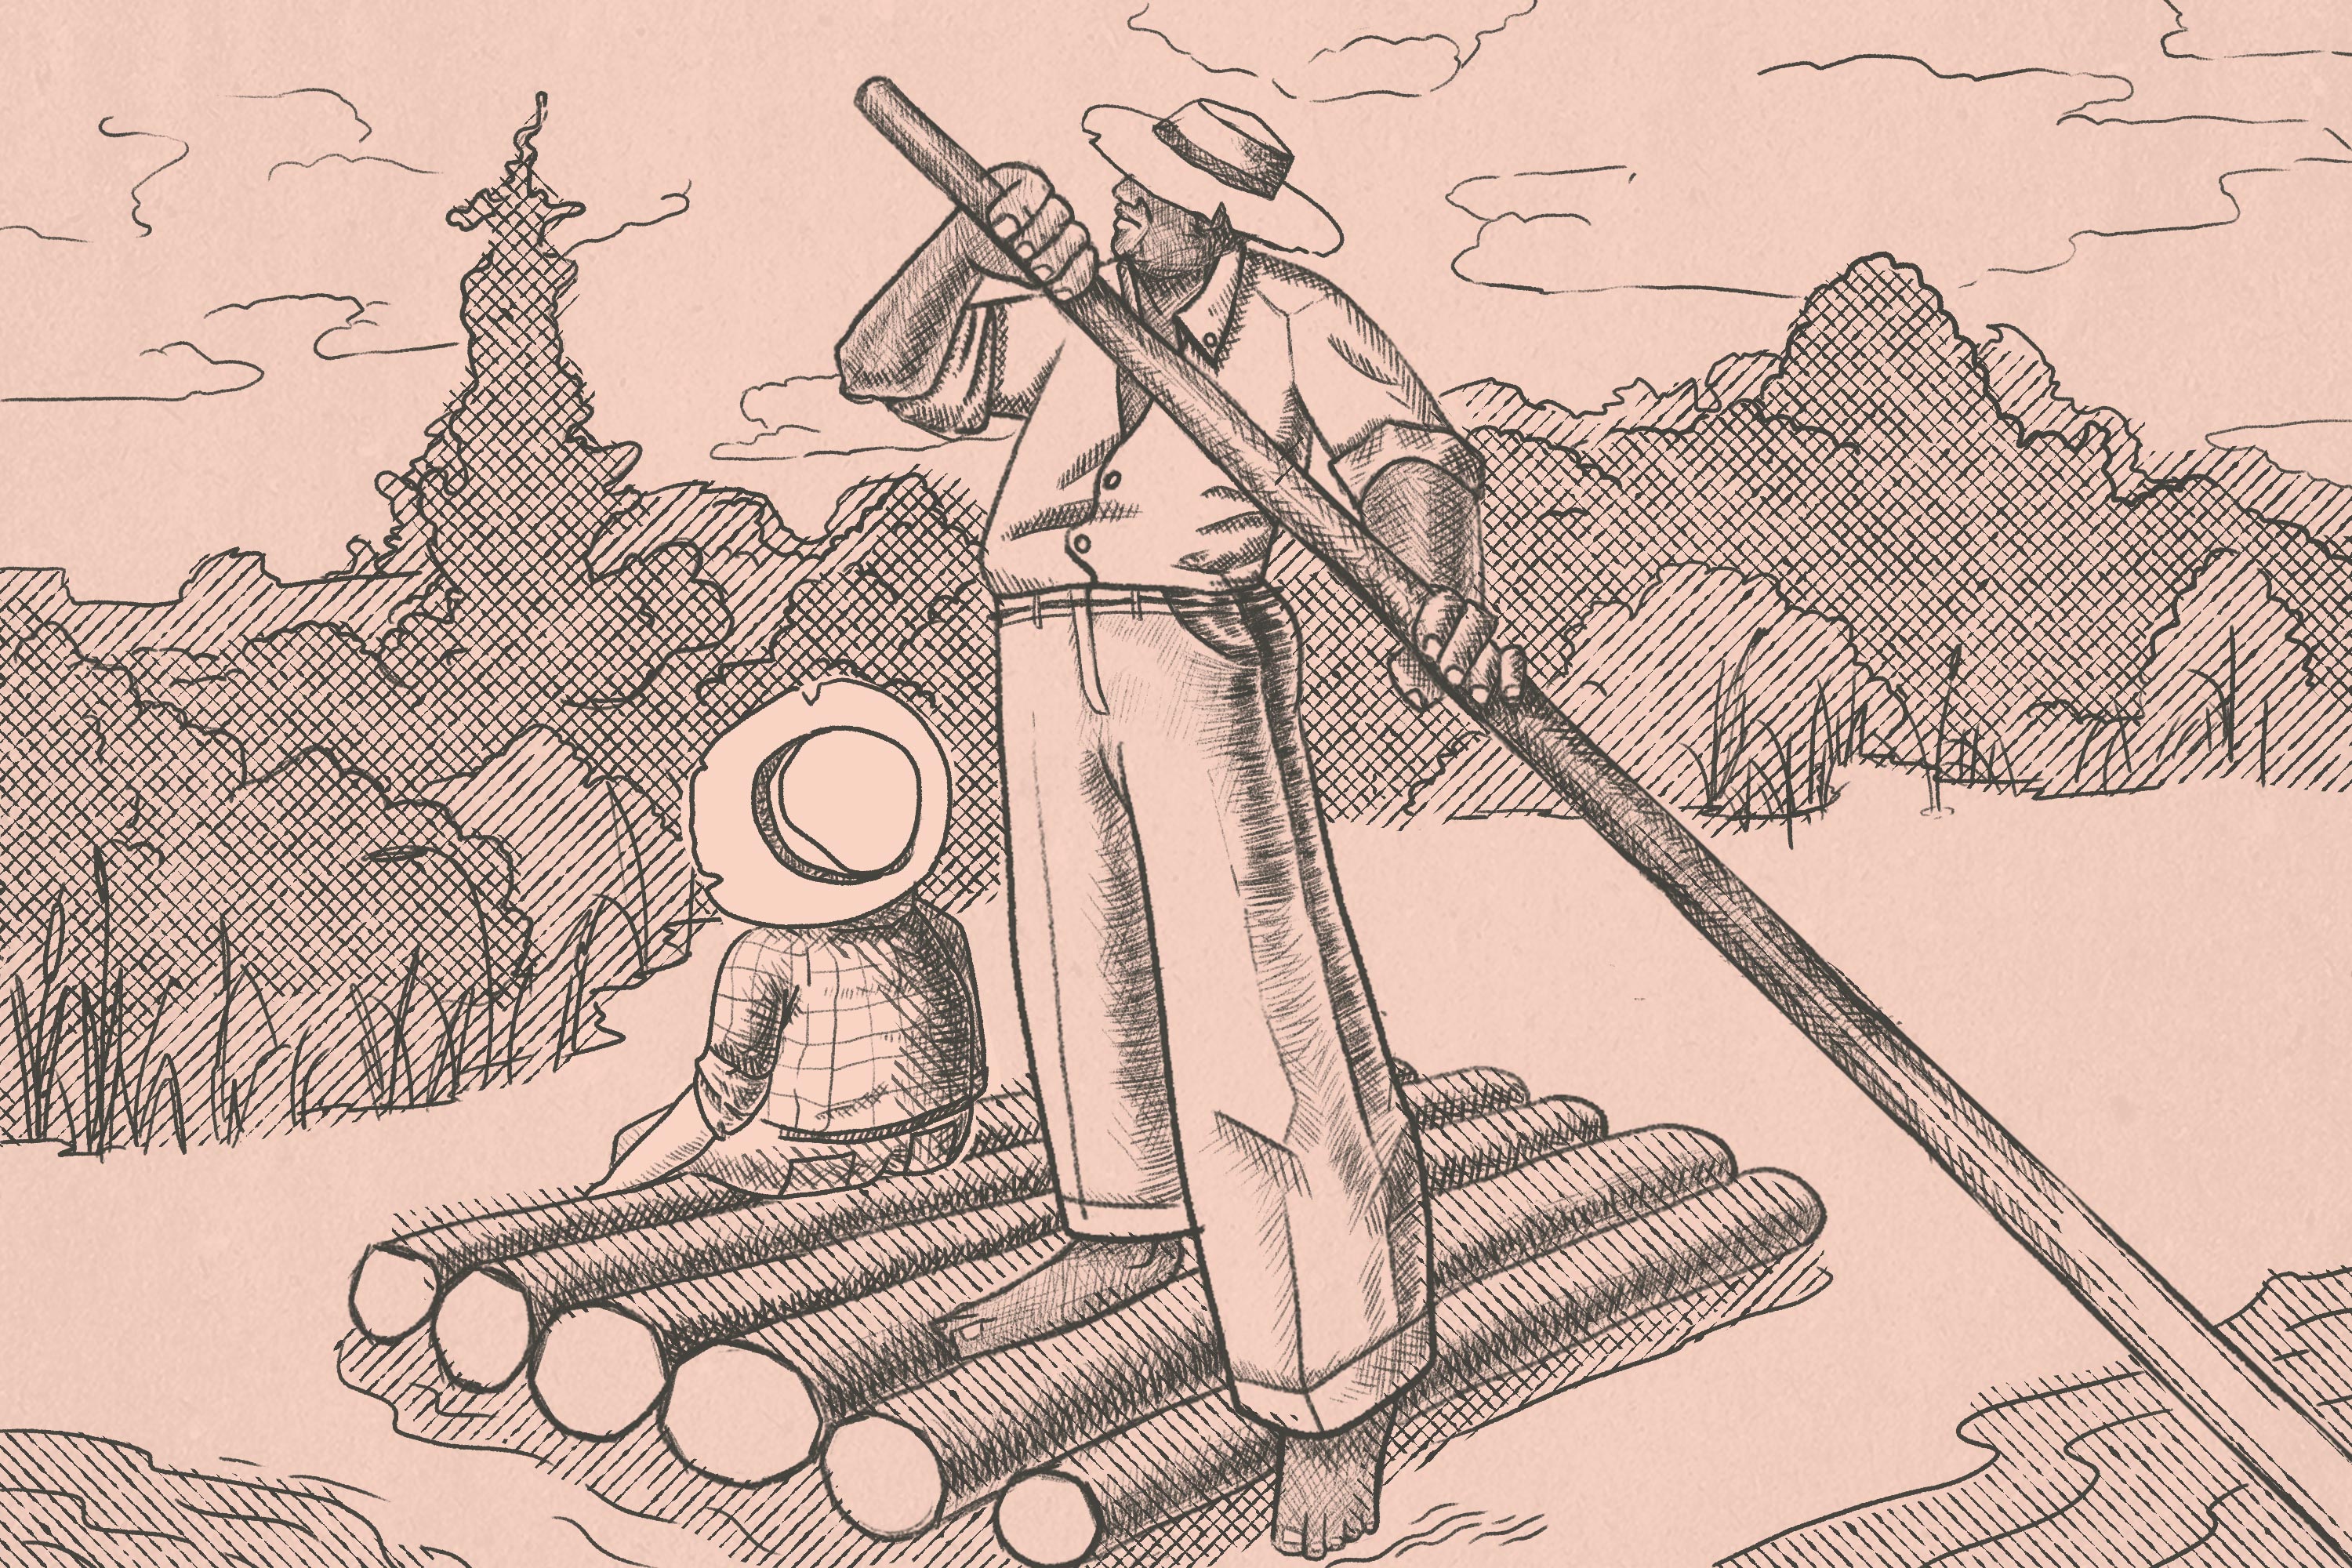 A pink and black illustration of Jim poling a raft through a beautiful landscape as Huckleberry Finn sits on it with his back to us.